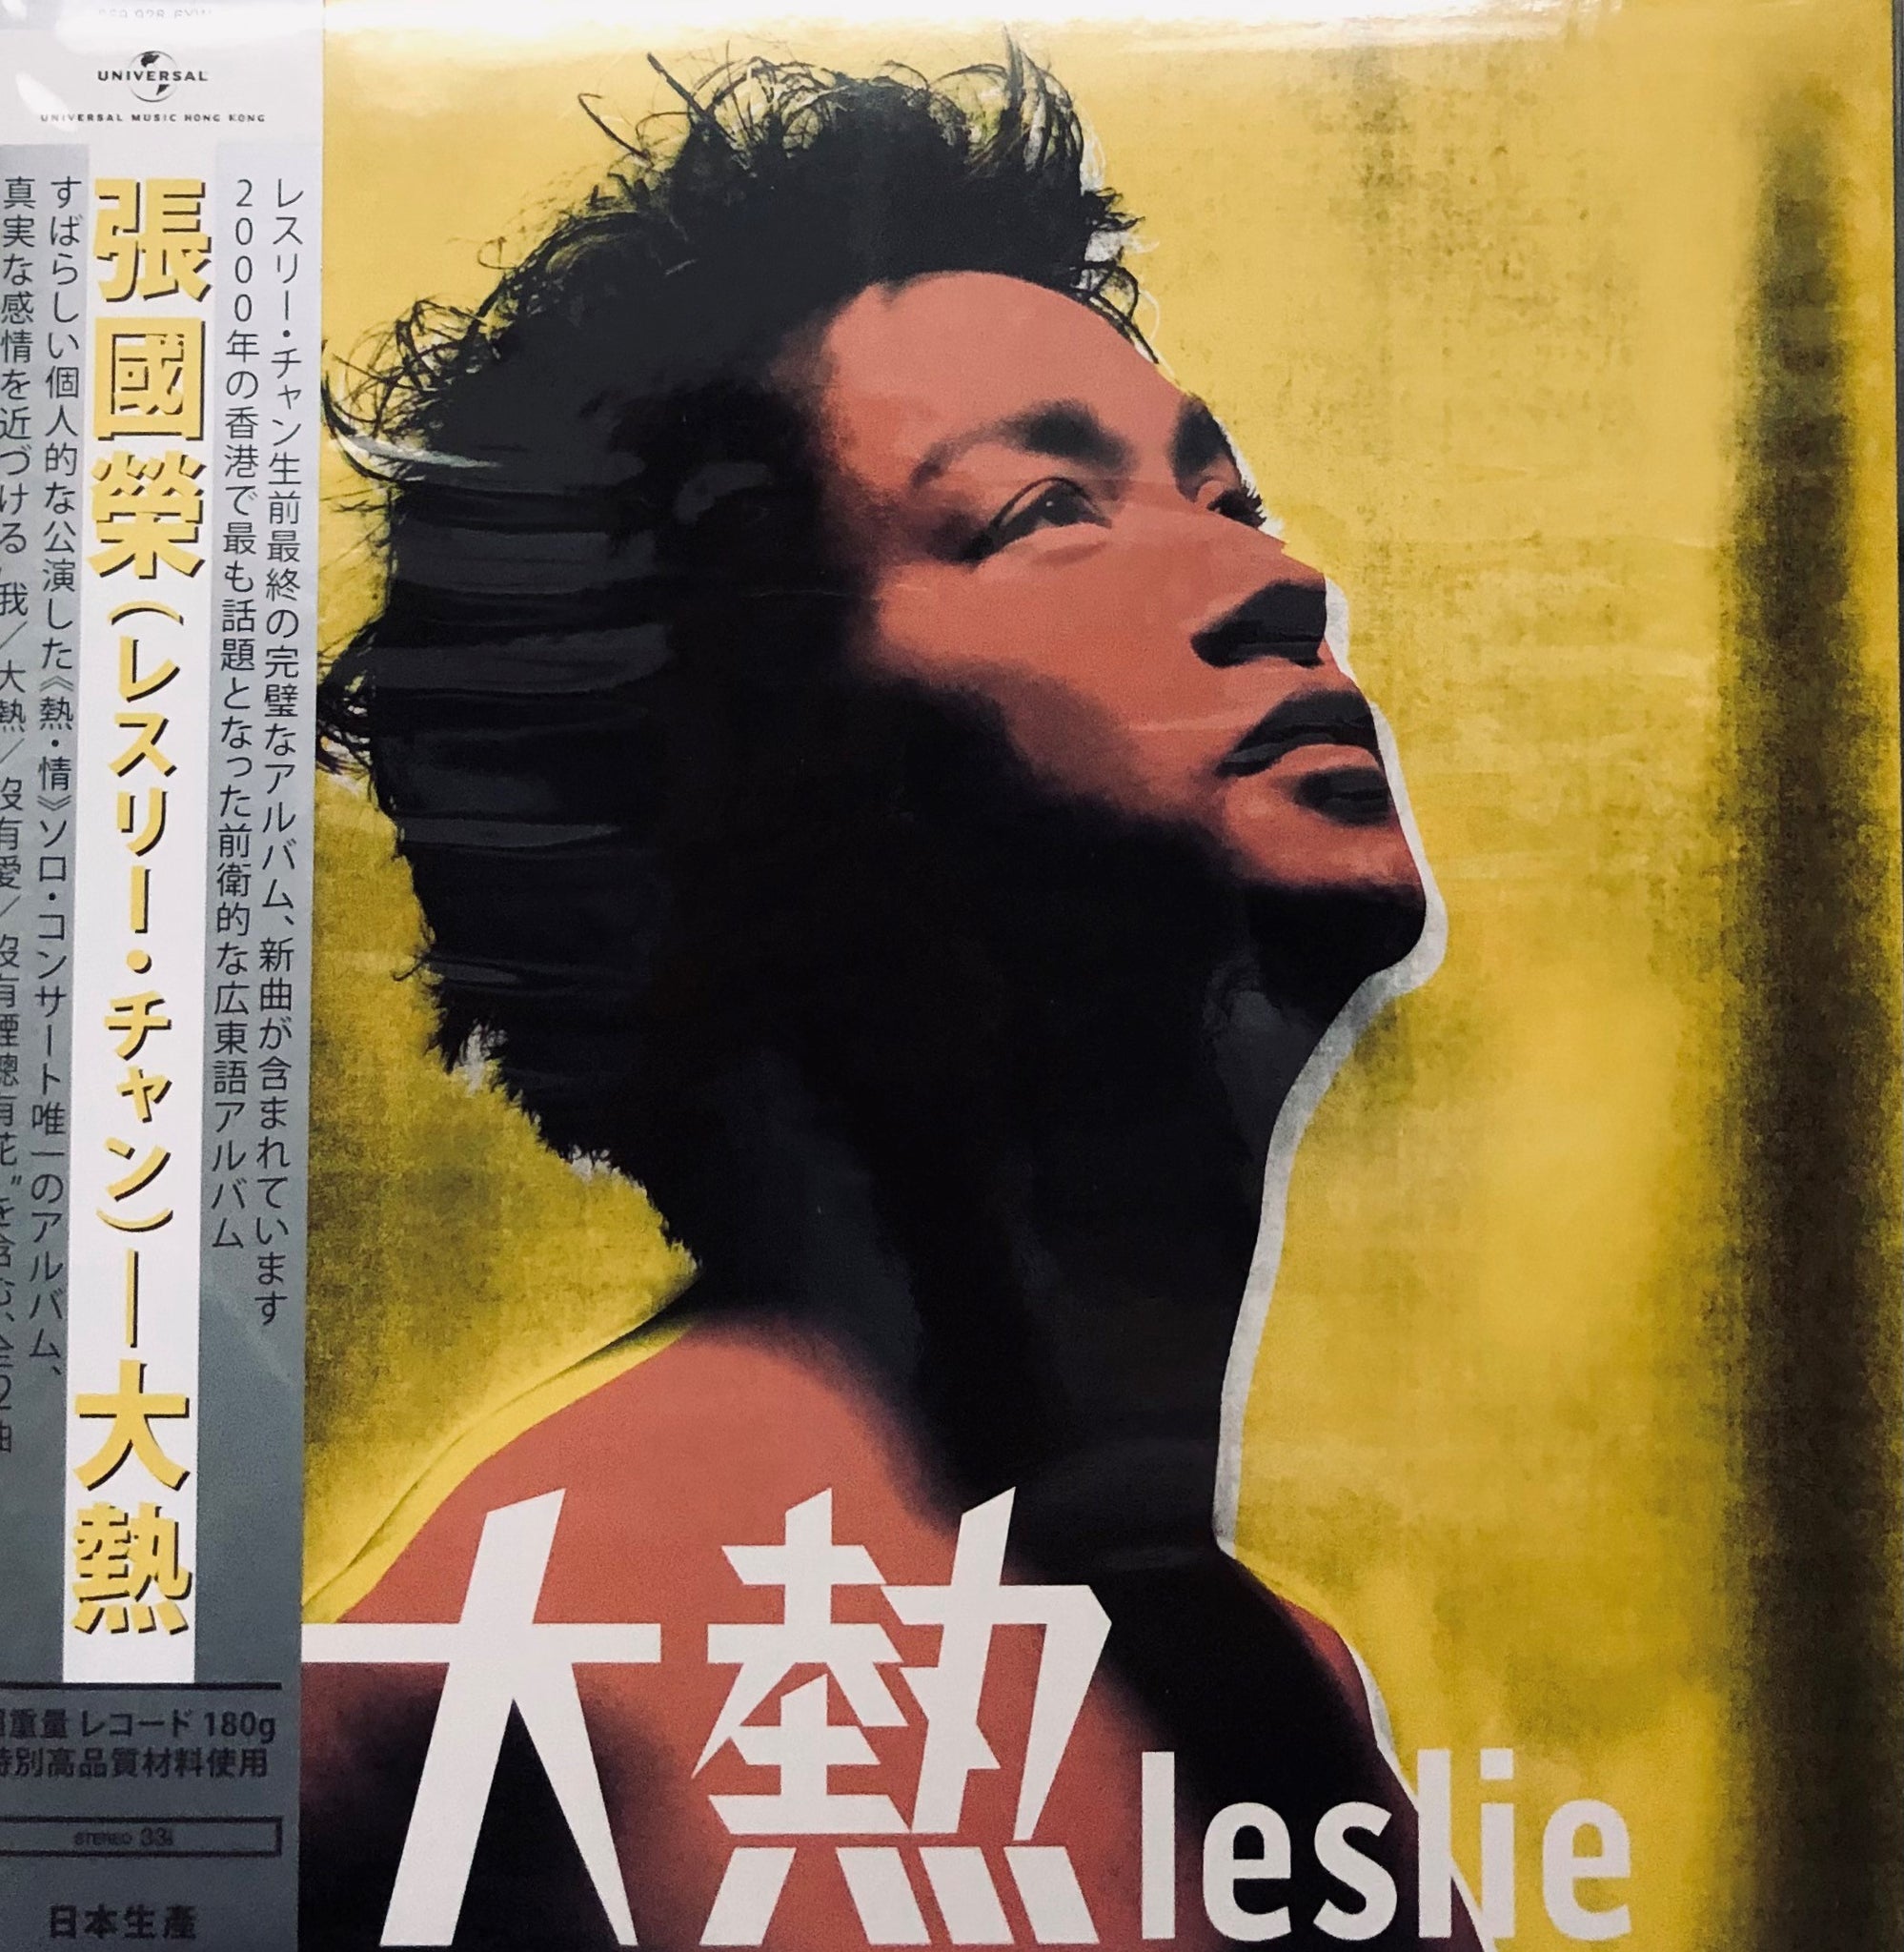 LESLIE CHEUNG - 張國榮 大熱 YELLOW COVER (VINYL) MADE IN JAPAN